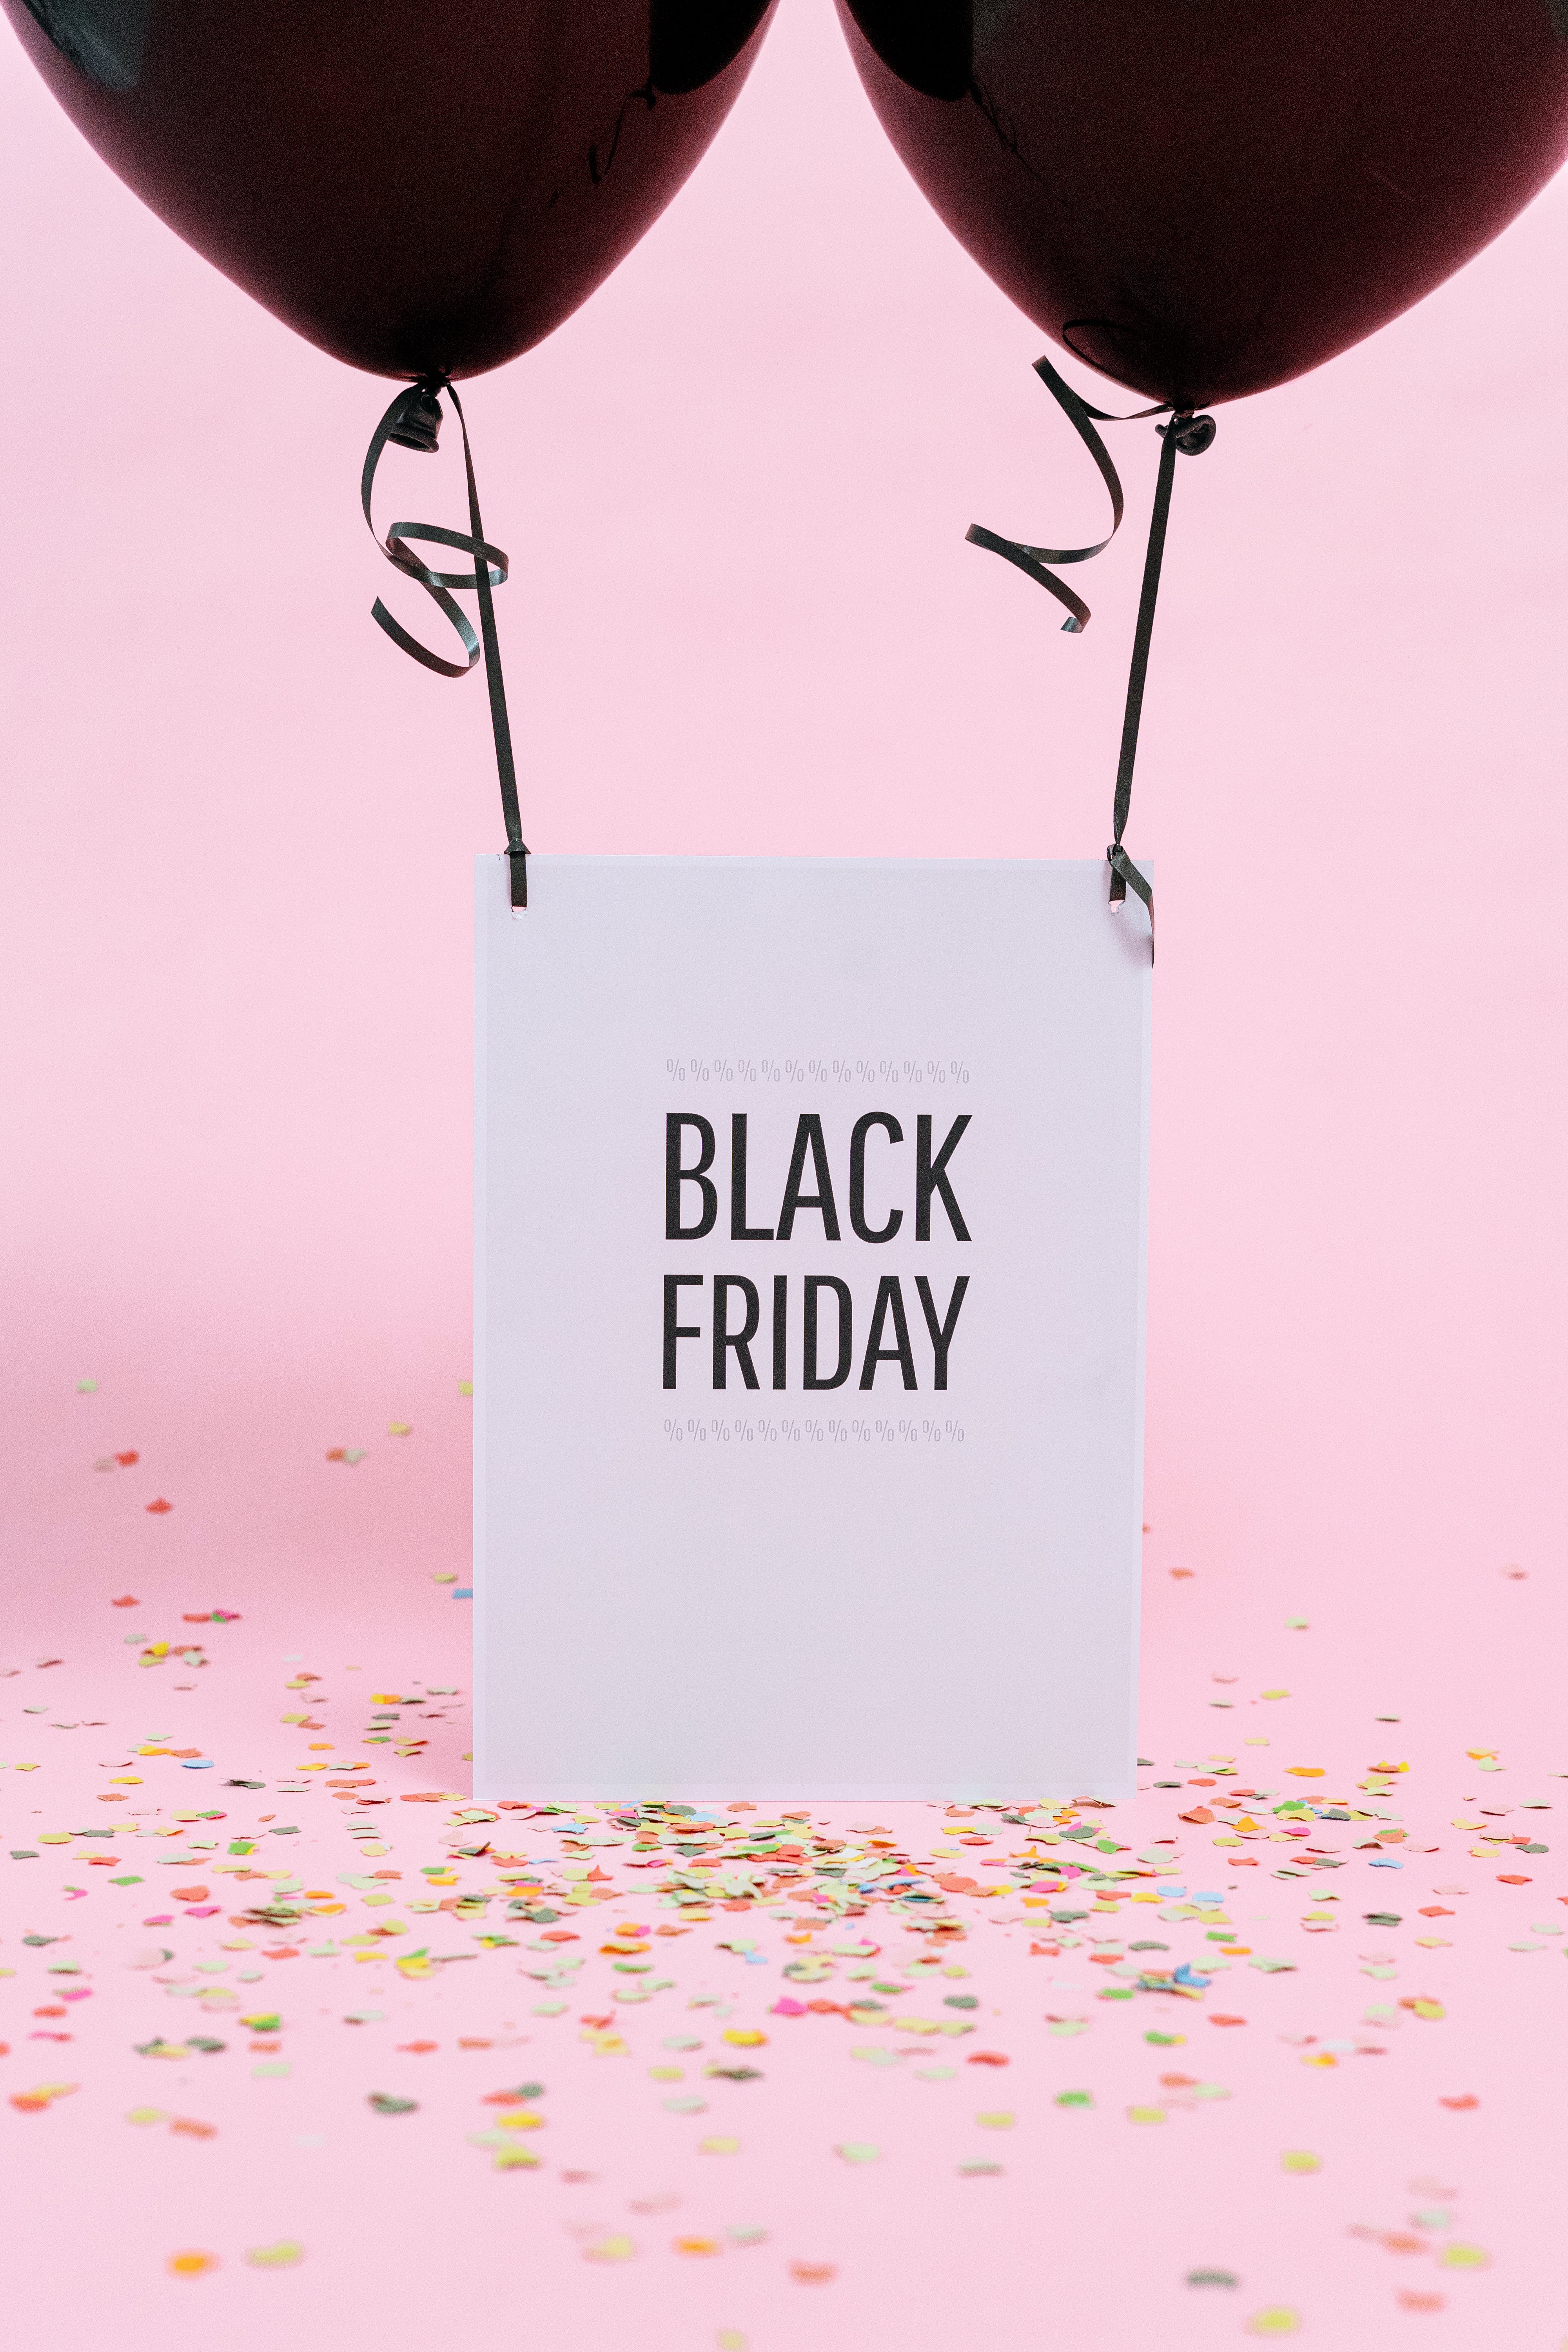 Black Friday poster with black balloons. | Source: Pexels